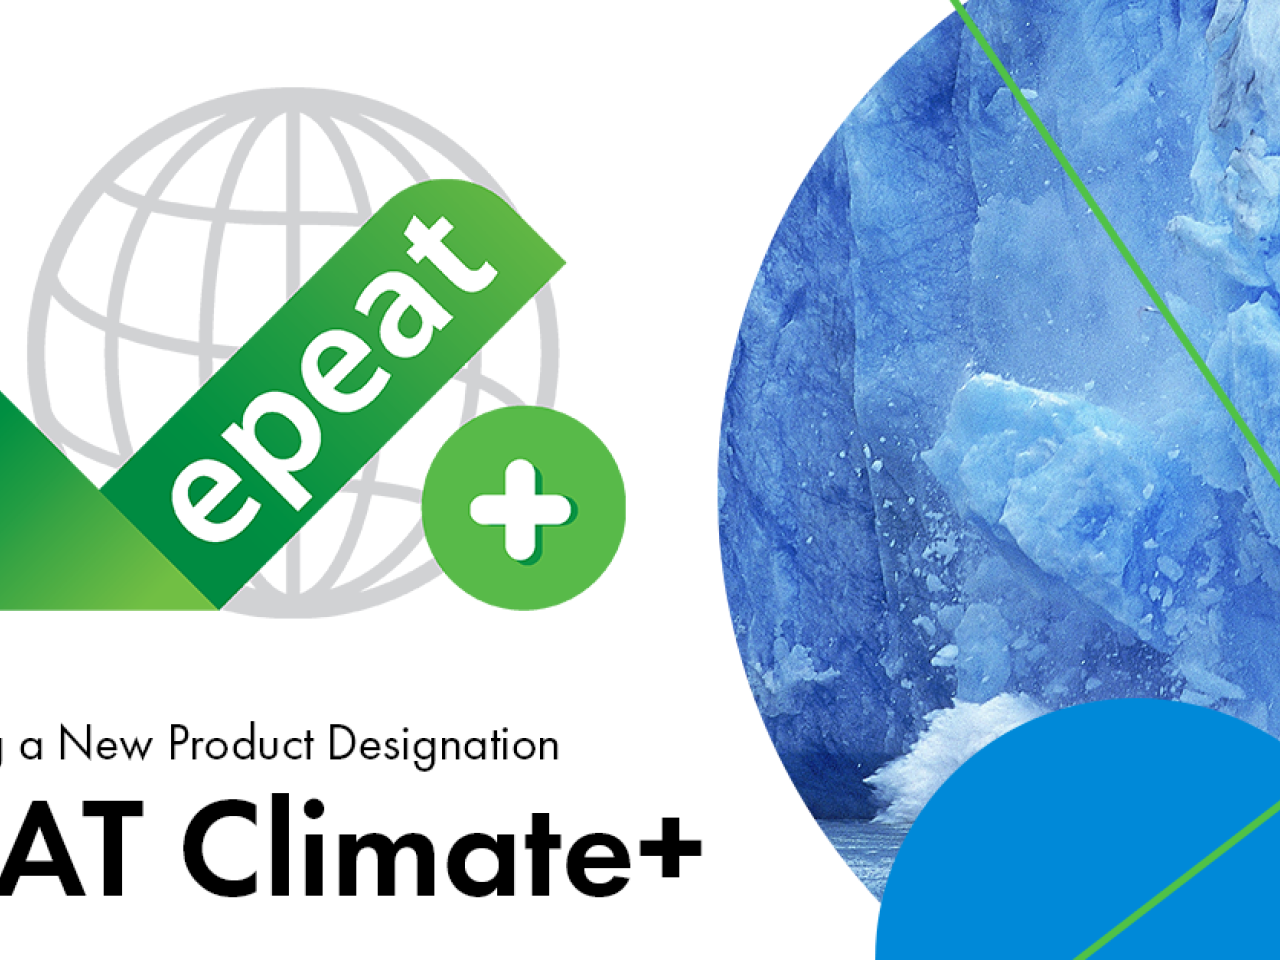 introducing epeat climate+